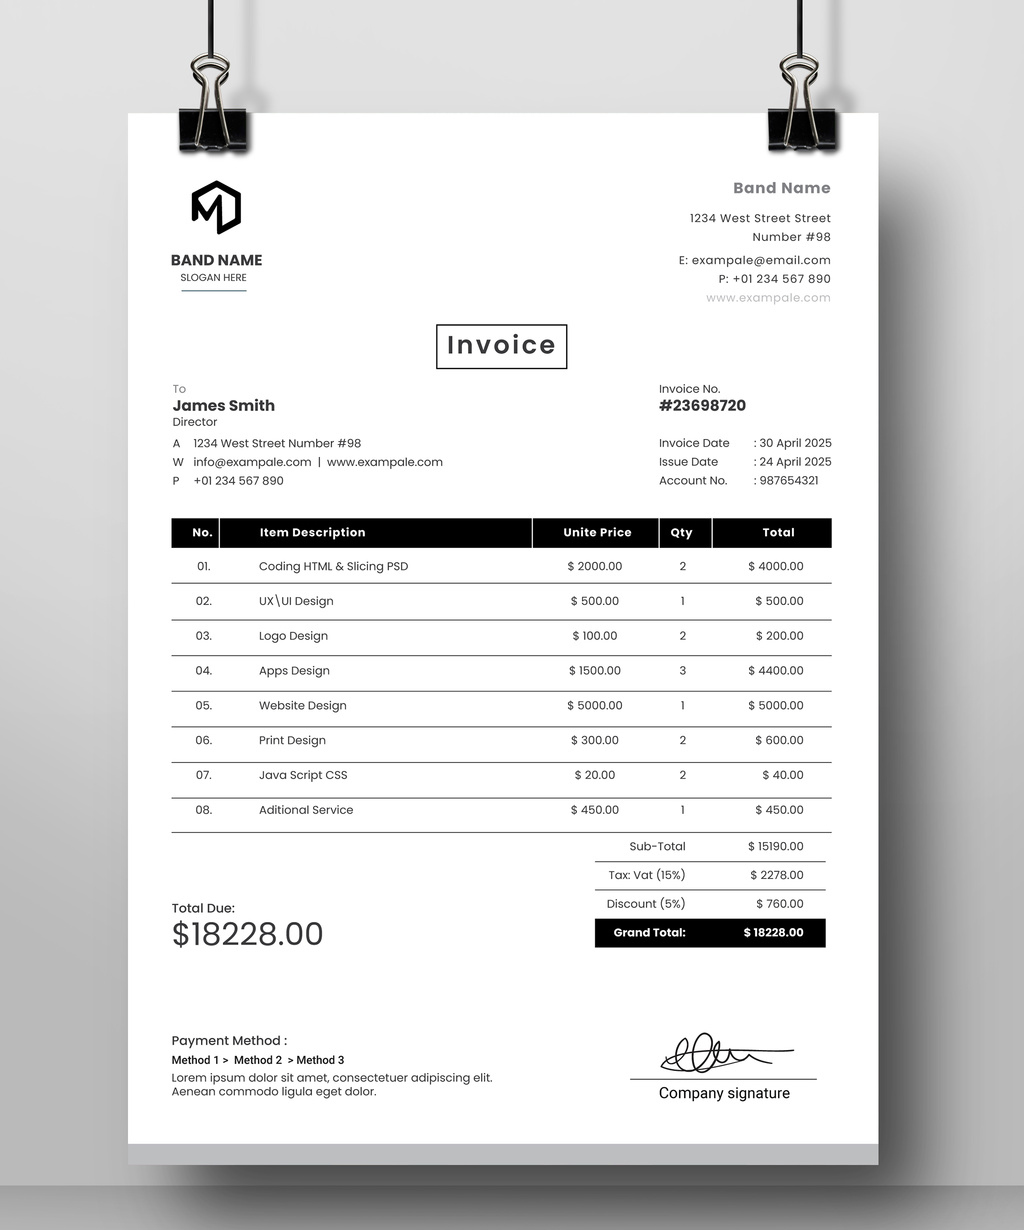 Invoice Layout (AI Format)